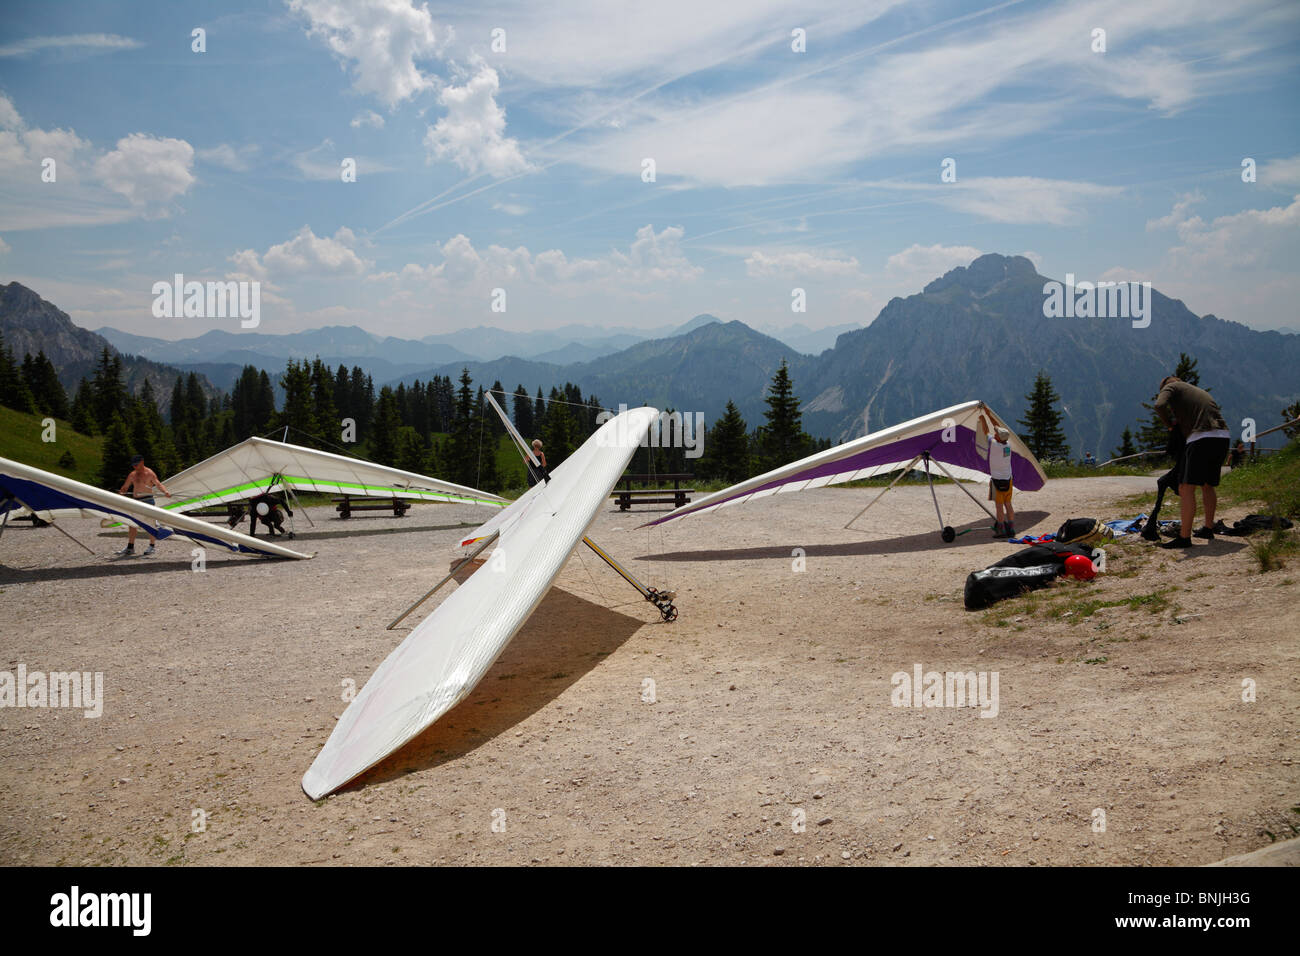 Hang gliders are preparing their planes before their take-off from the summit of Tegelberg, Scwangau, Bavaria, Germany. Stock Photo